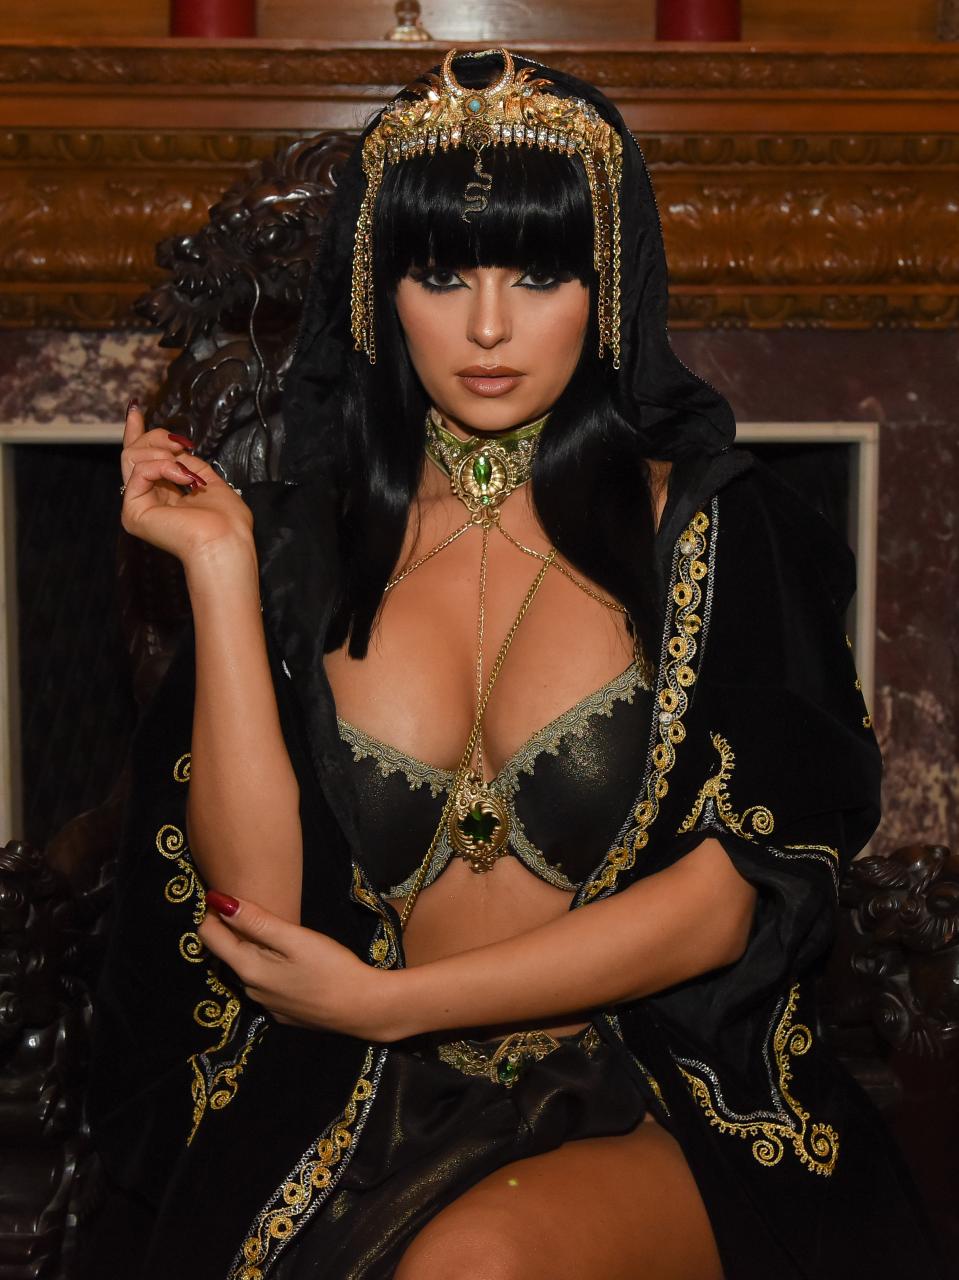  Demi embodied Cleopatra with her black wig and headdress